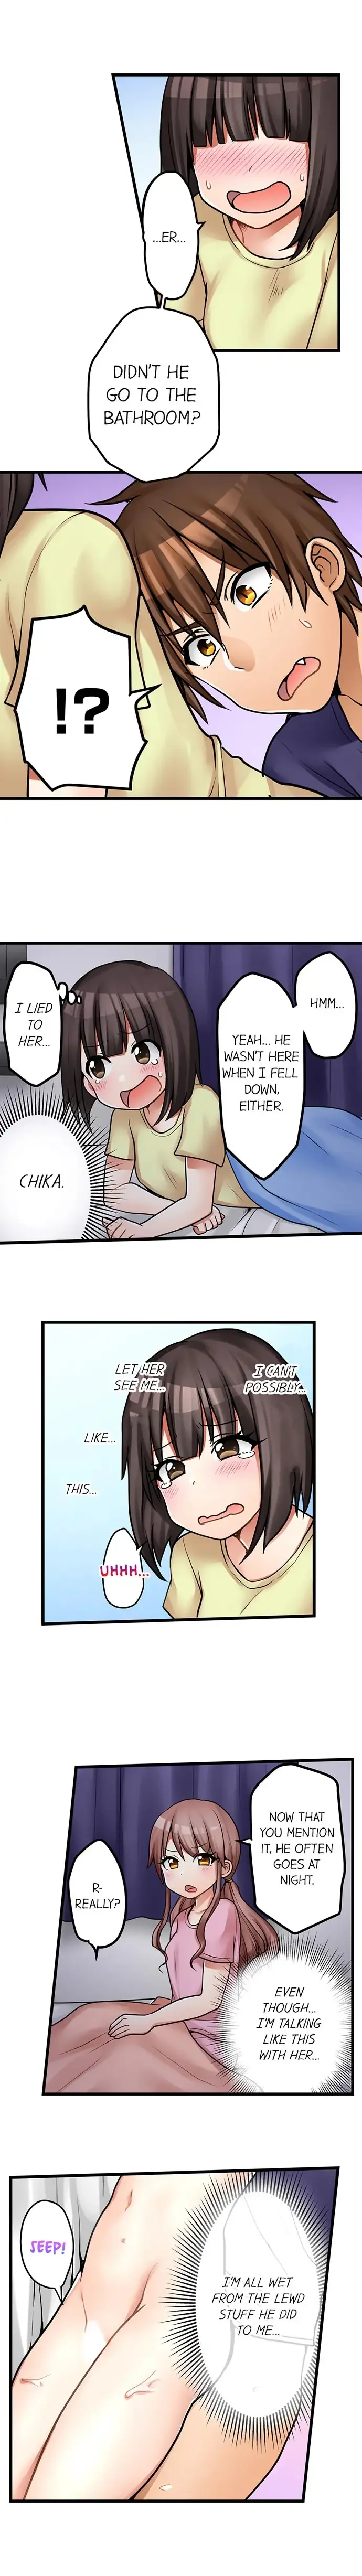 my-first-time-is-with-my-little-sister-chap-43-2